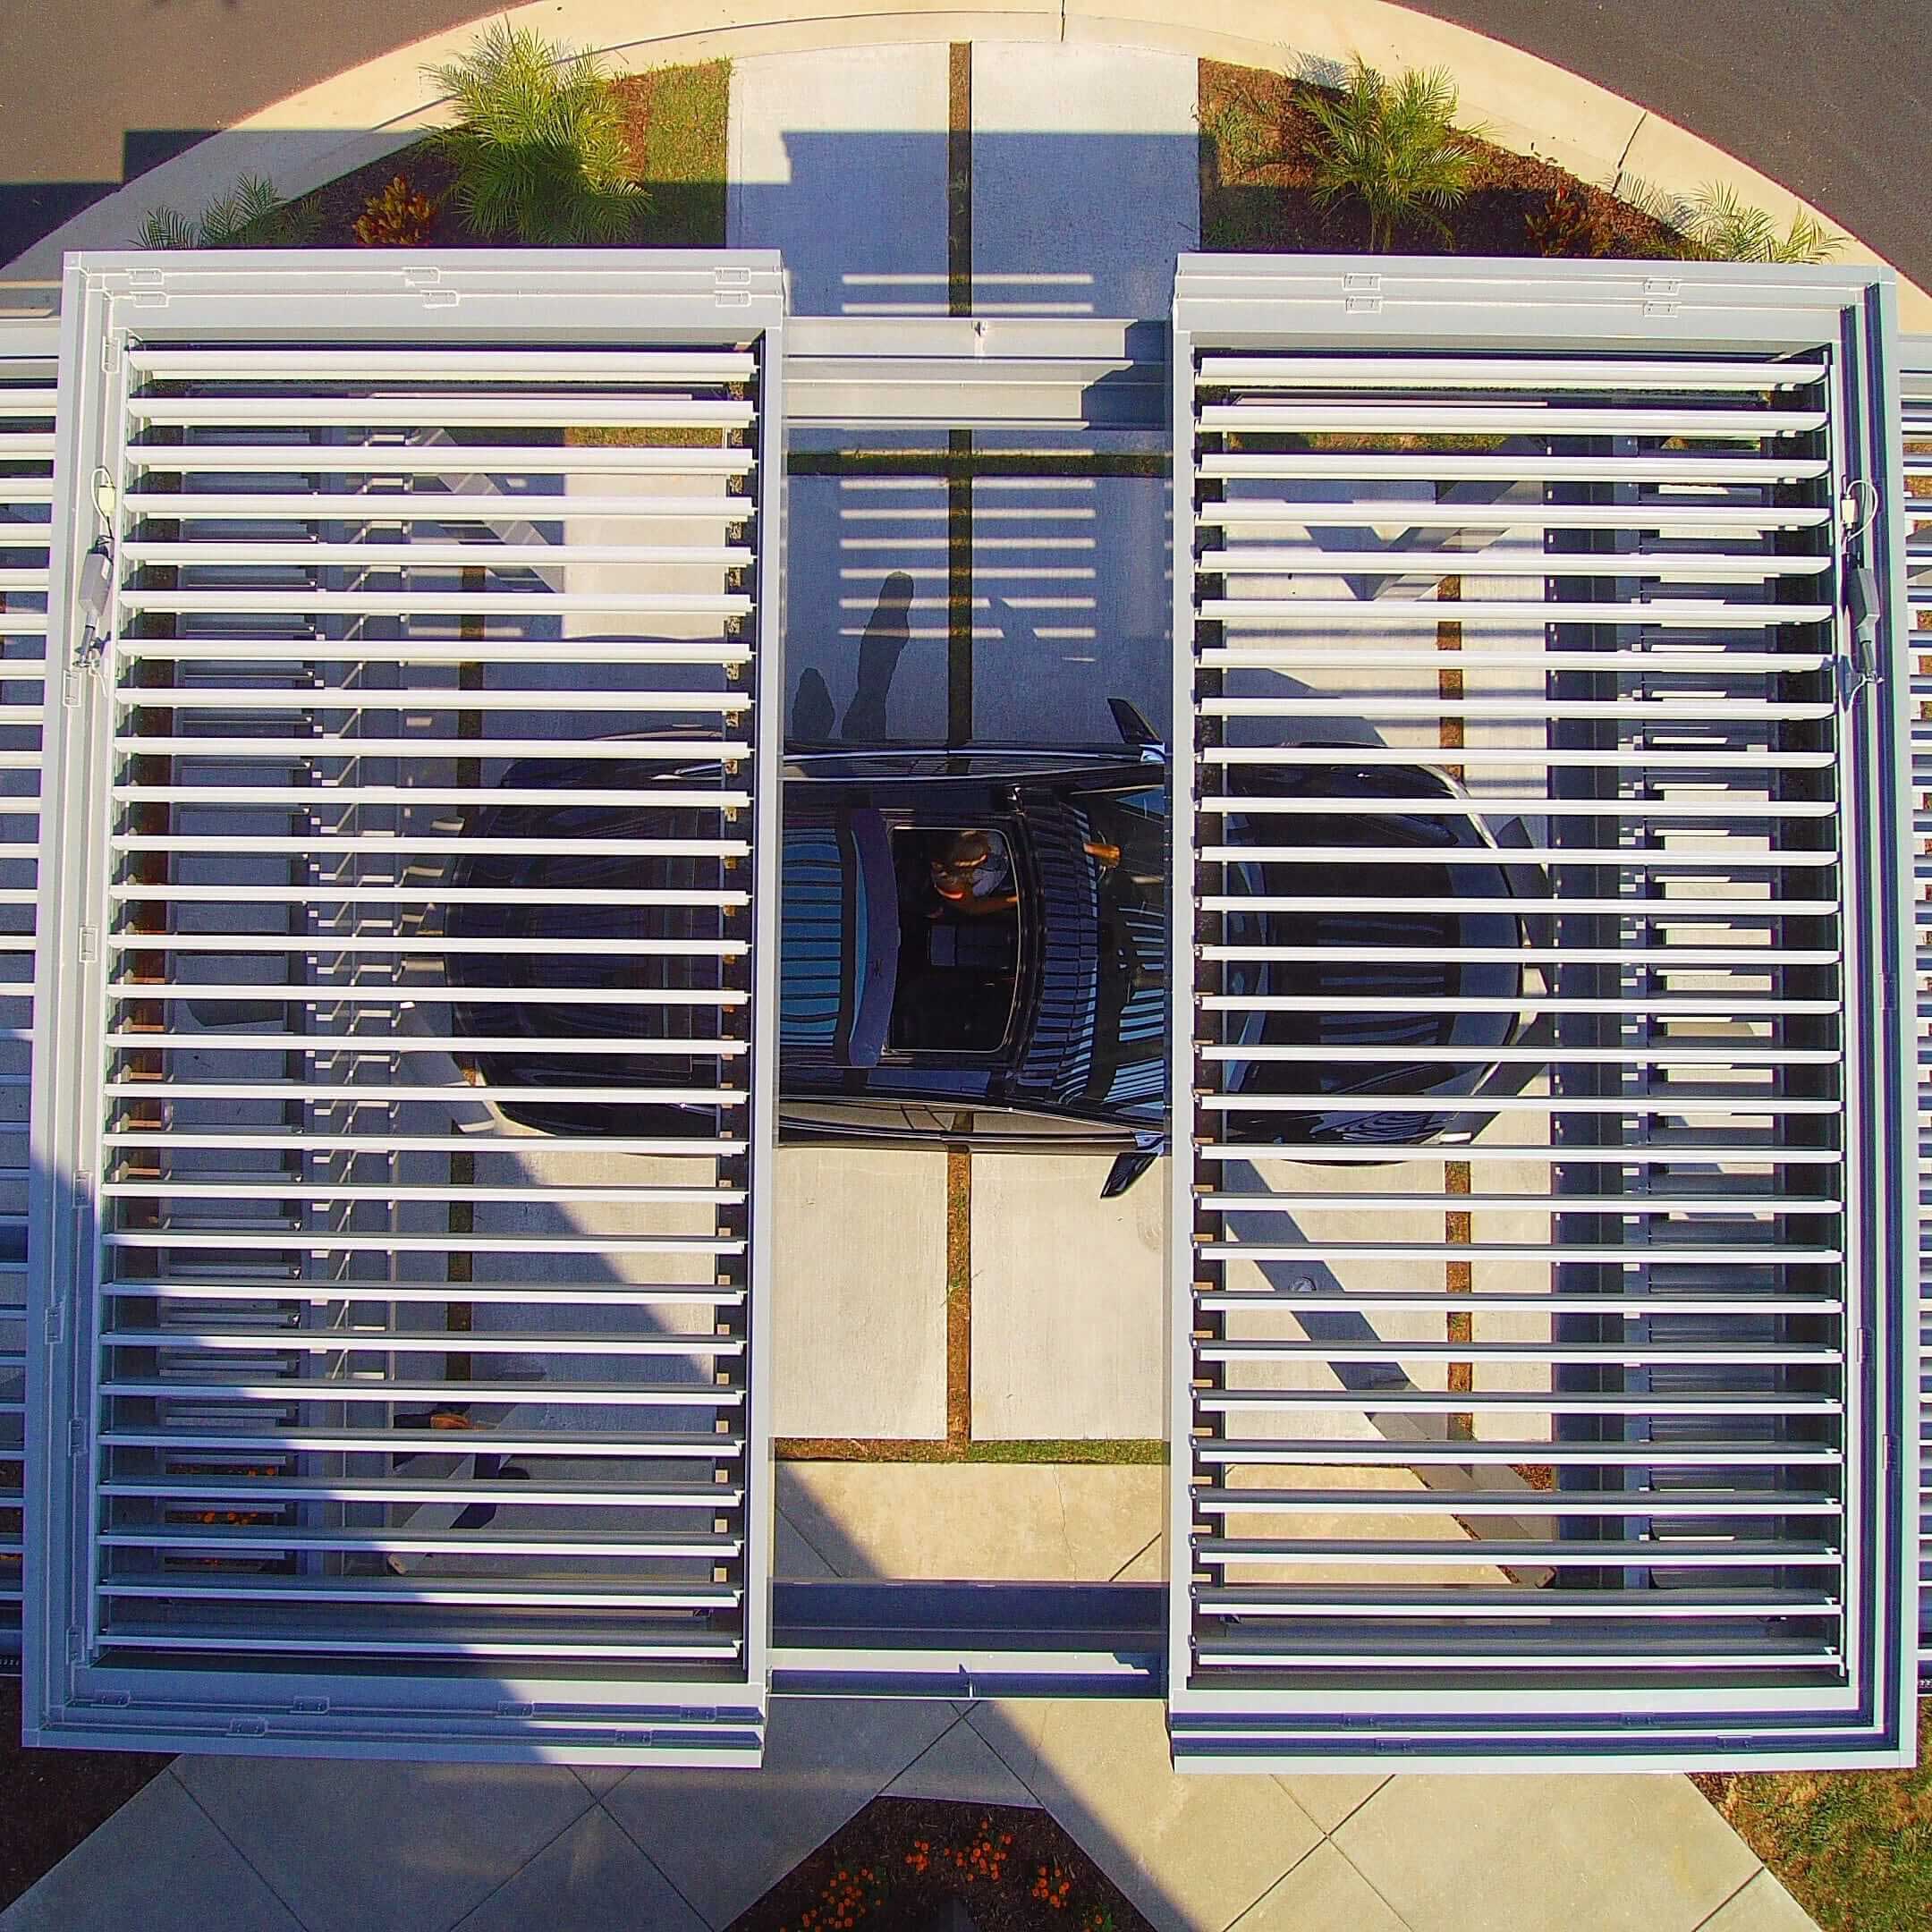 Aerial view of a SruXure pergola with adjustable louvers, installed over a driveway with a parked car beneath it.